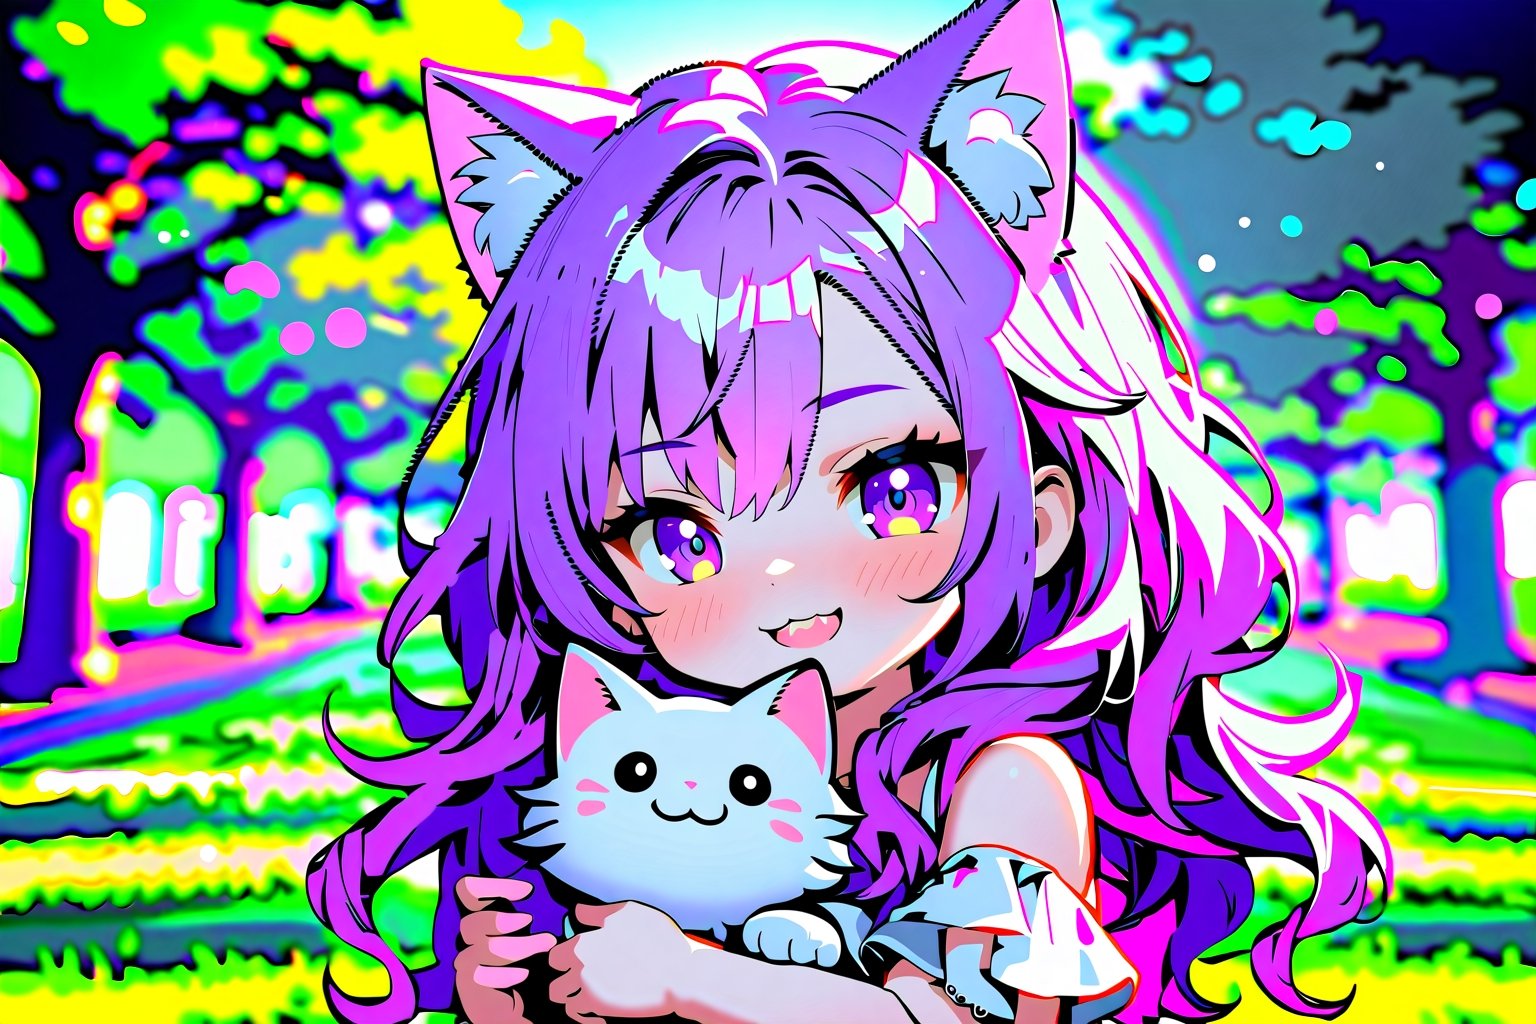 Highly detailed, high quality, masterpiece, beautiful, purple hair, long hair : 1. 2, smiling, holding a fluffy cat, chibi, 1 girl, white dress, kid, cute, wavy hair, kawaii, cat ears, playing in park

